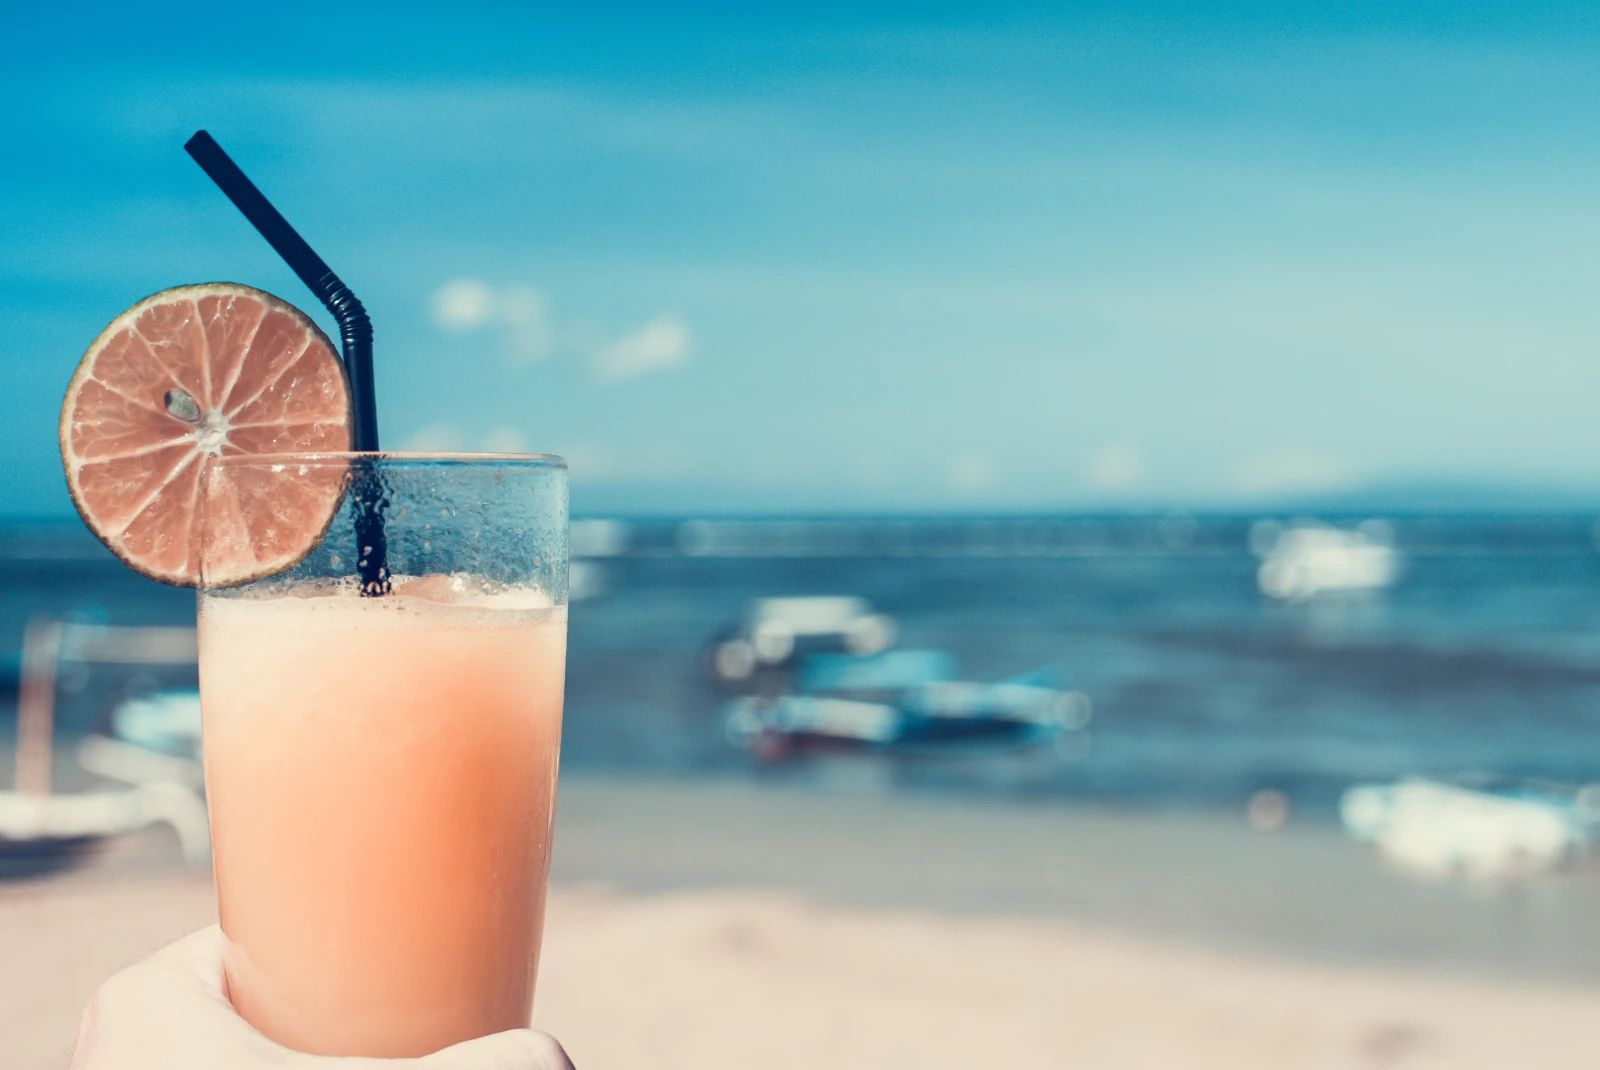 Pink drink in a glass with a black straw with beach in the background